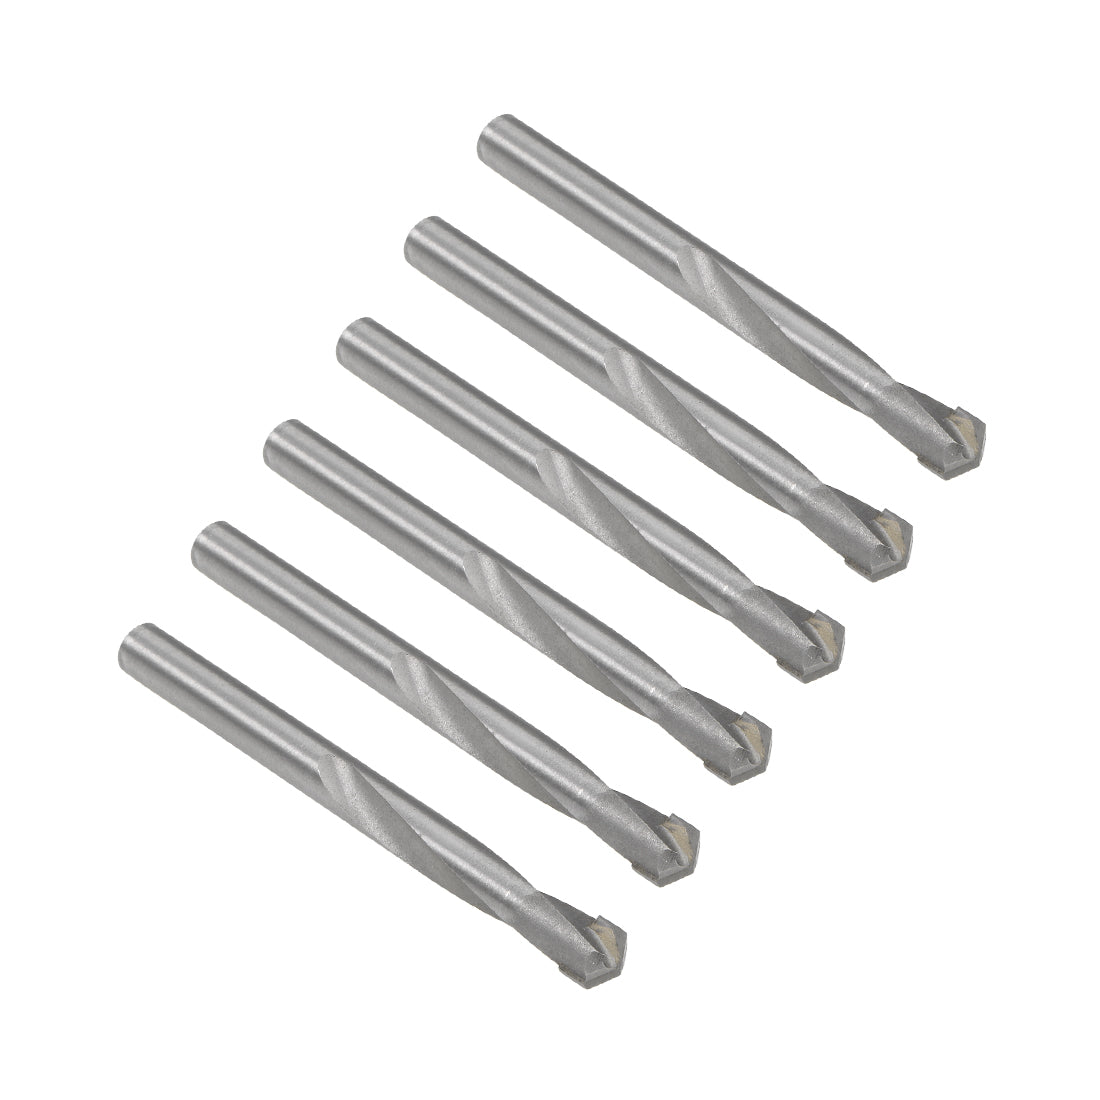 uxcell Uxcell 10mm Cemented Carbide Twist Drill Bits for Stainless Steel Copper Aluminum 6 Pcs